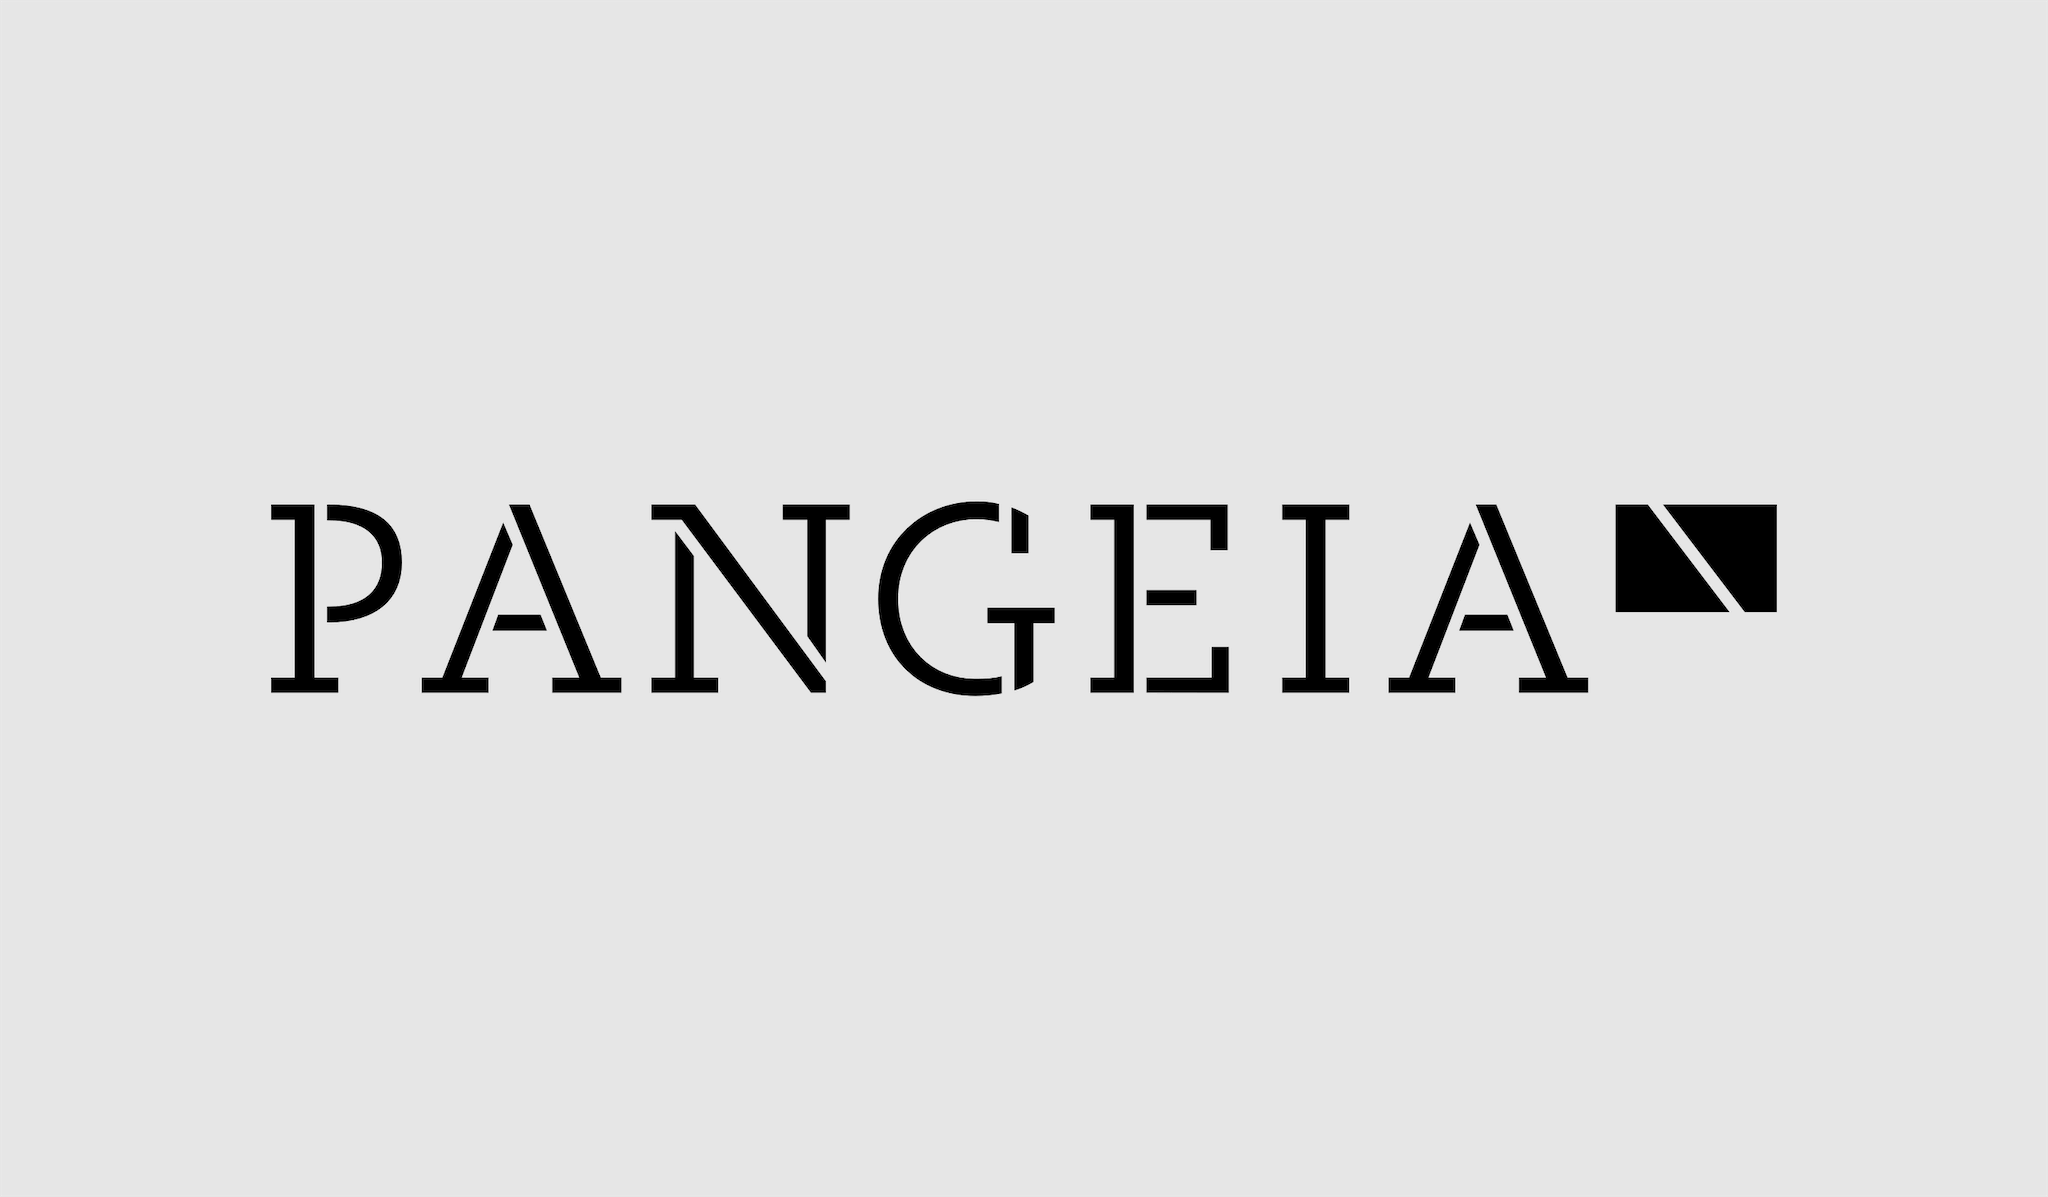 Logotype composed by the words "PANGEIA" and a rectangular shape in placed in the right top.